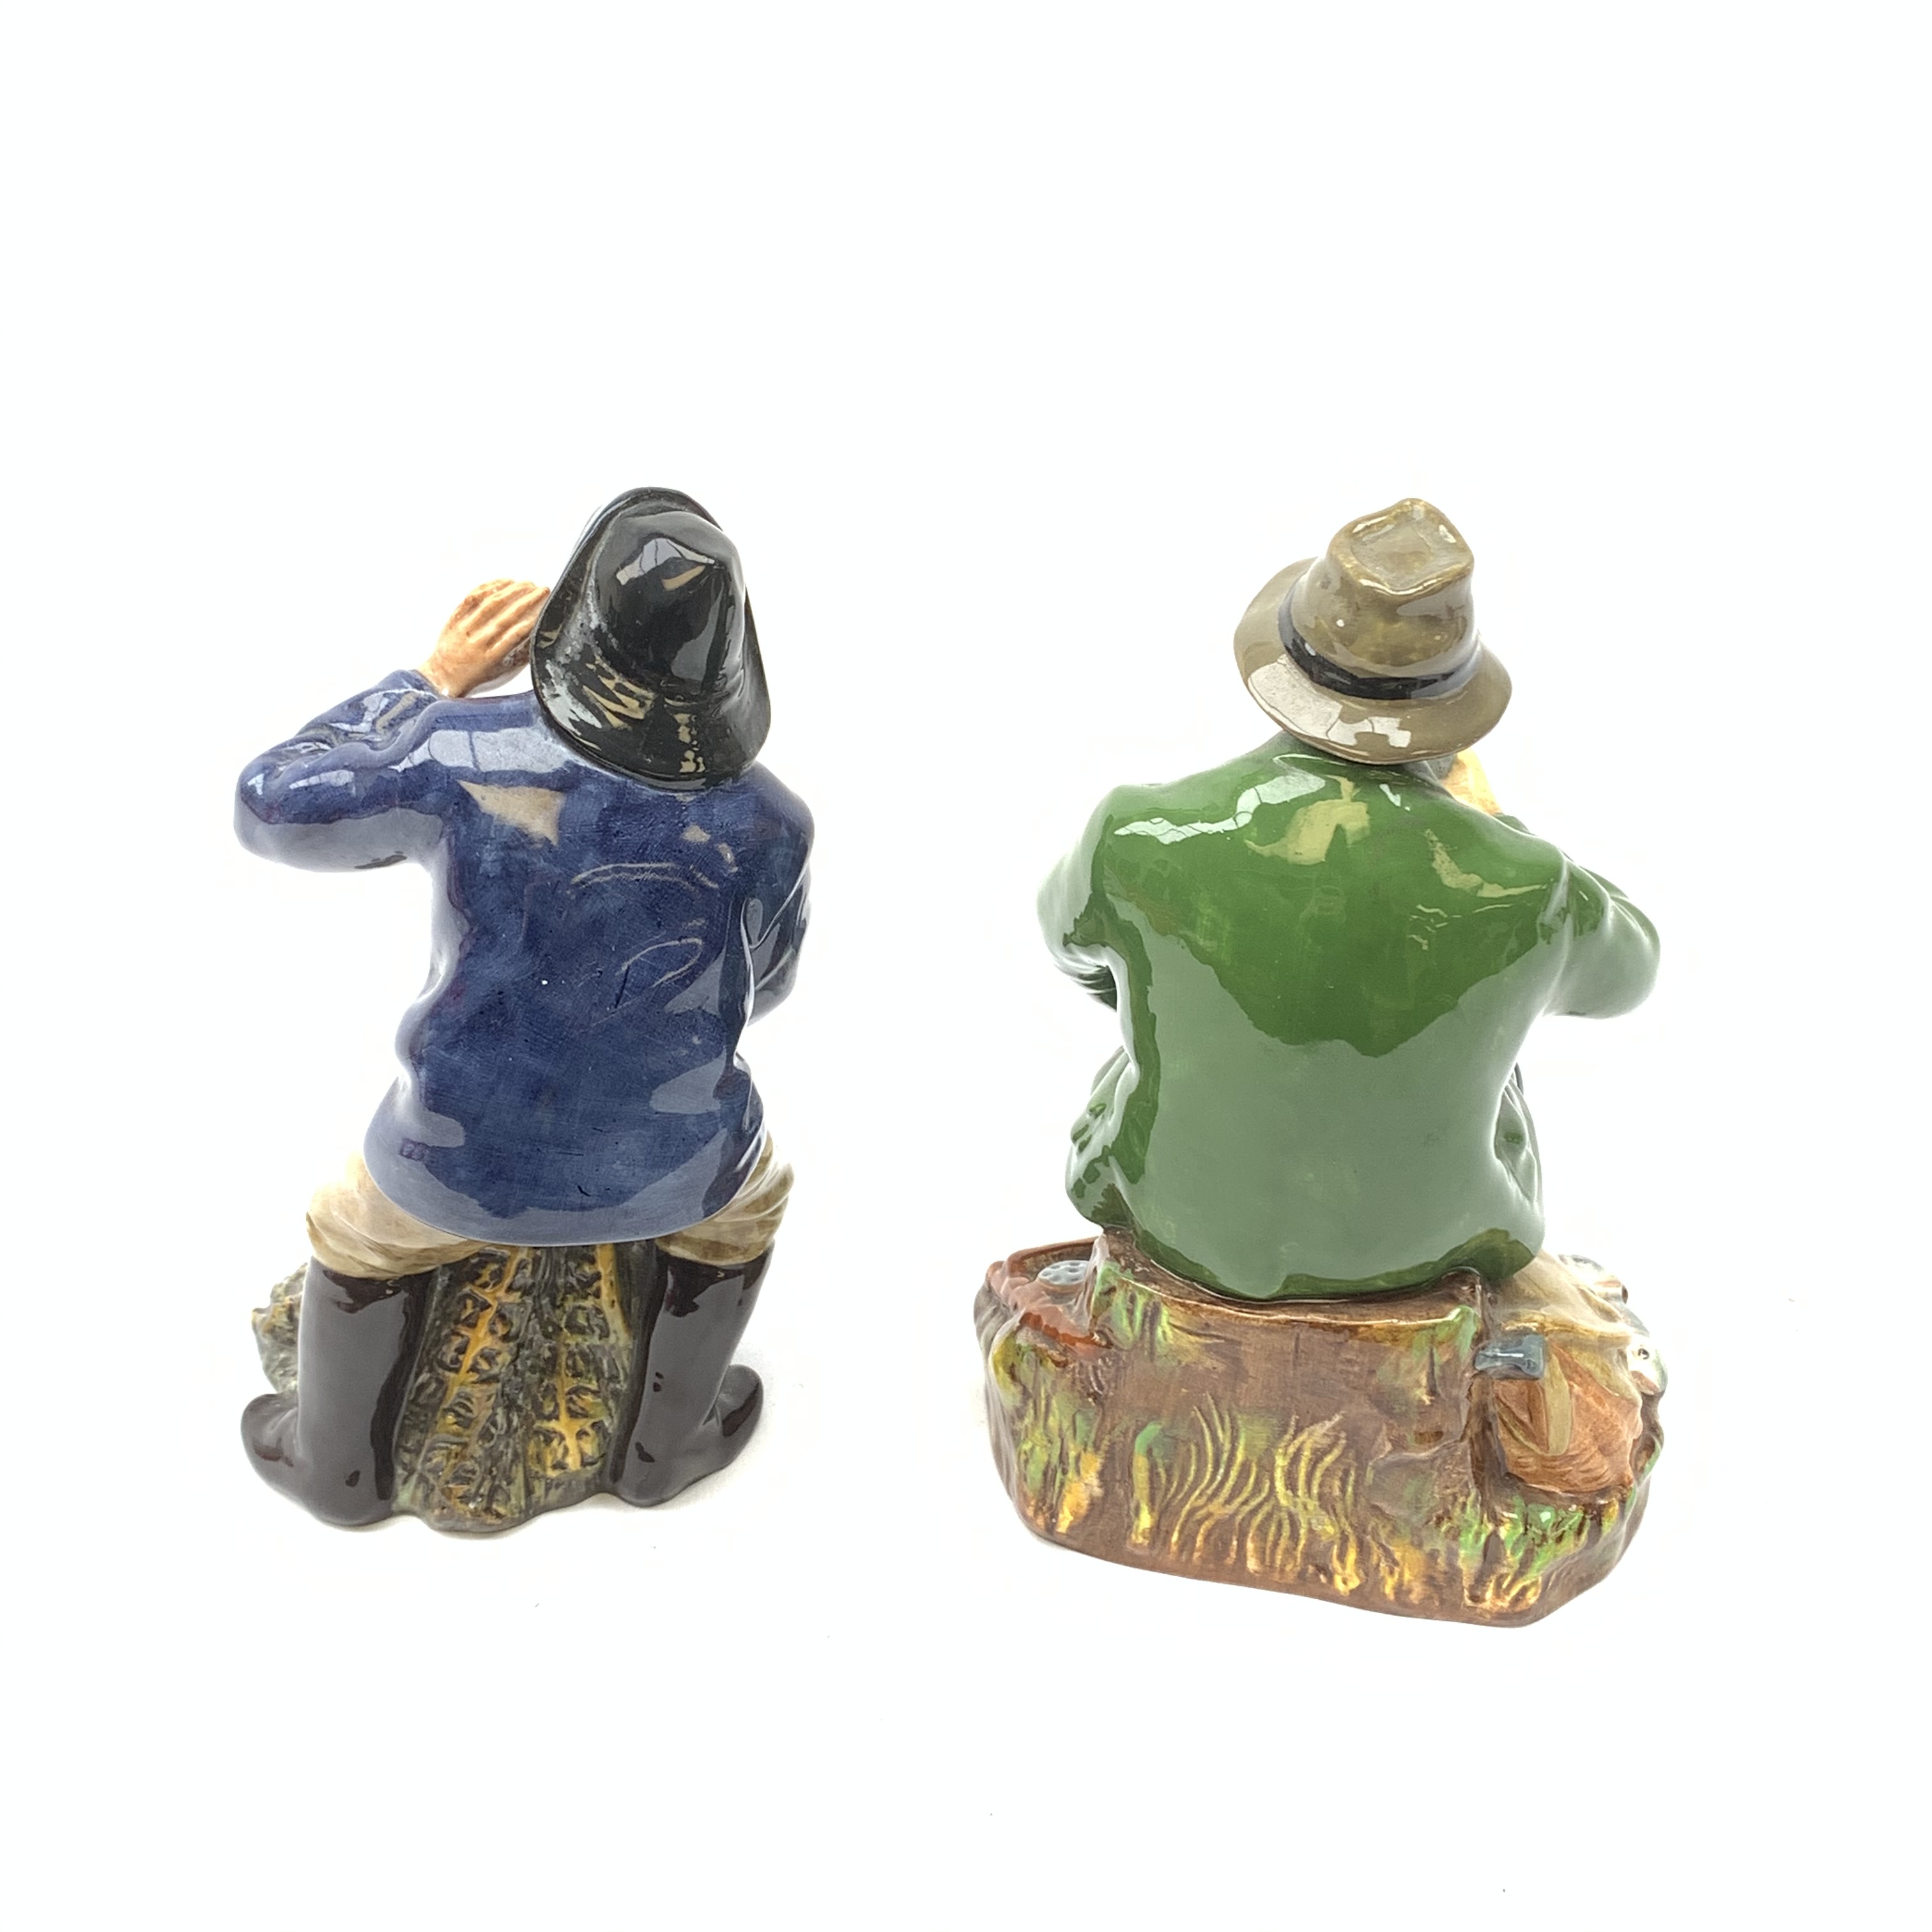 Two Royal Doulton figurines, A Good Catch HN1965, and Sea Harvest HN2357, each with green printed ma - Image 5 of 6